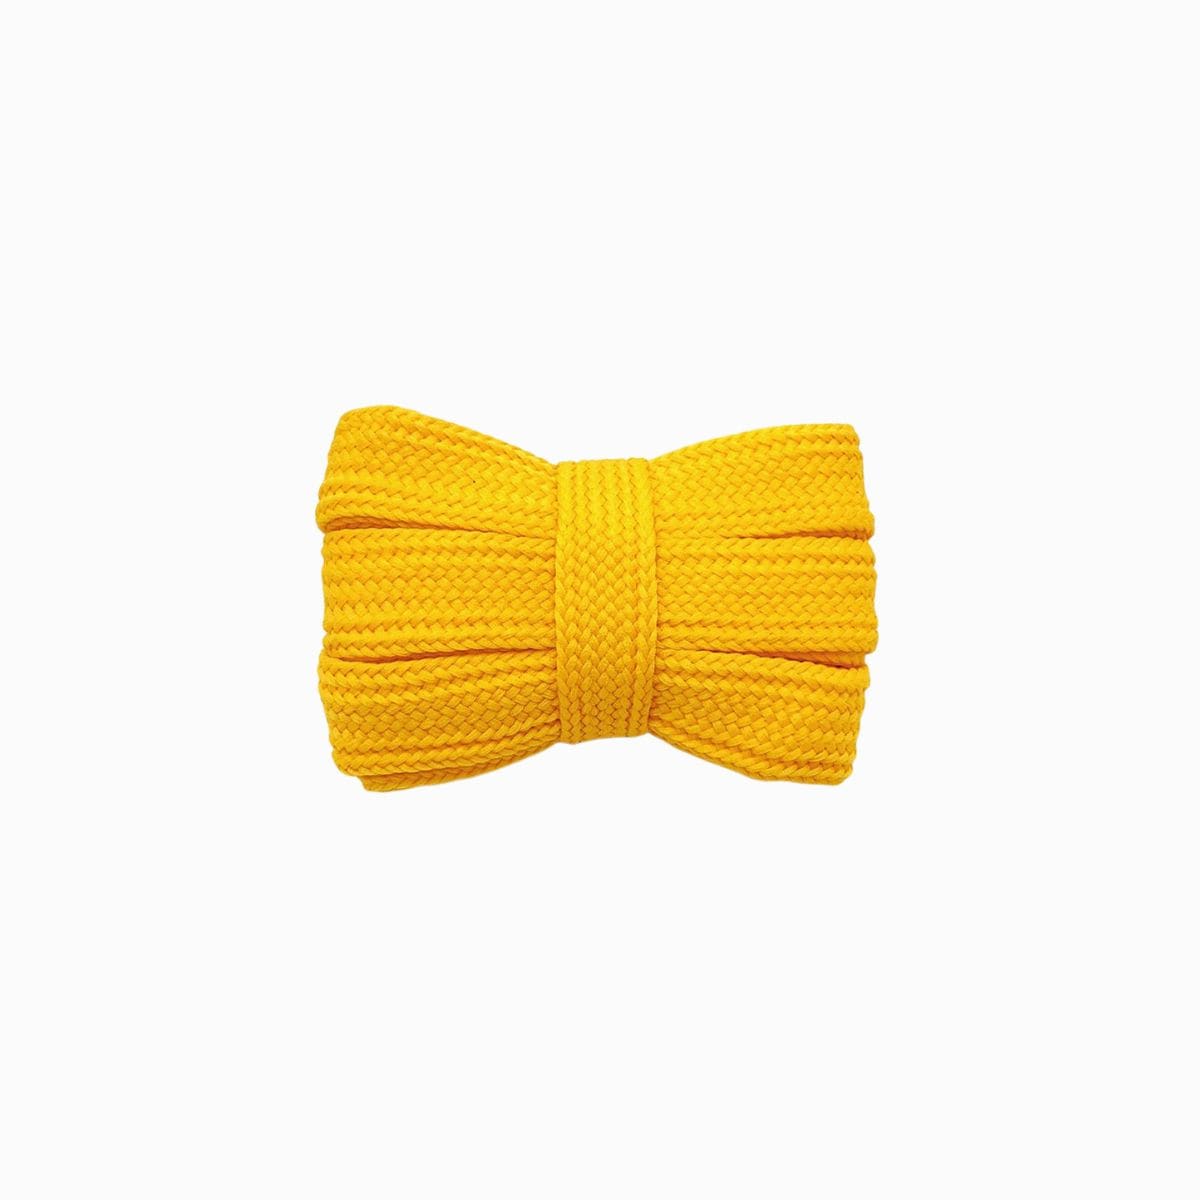 Golden Yellow Adidas Fat Laces Replacement shoelaces for Adidas Sneakers by Kicks Shoelaces